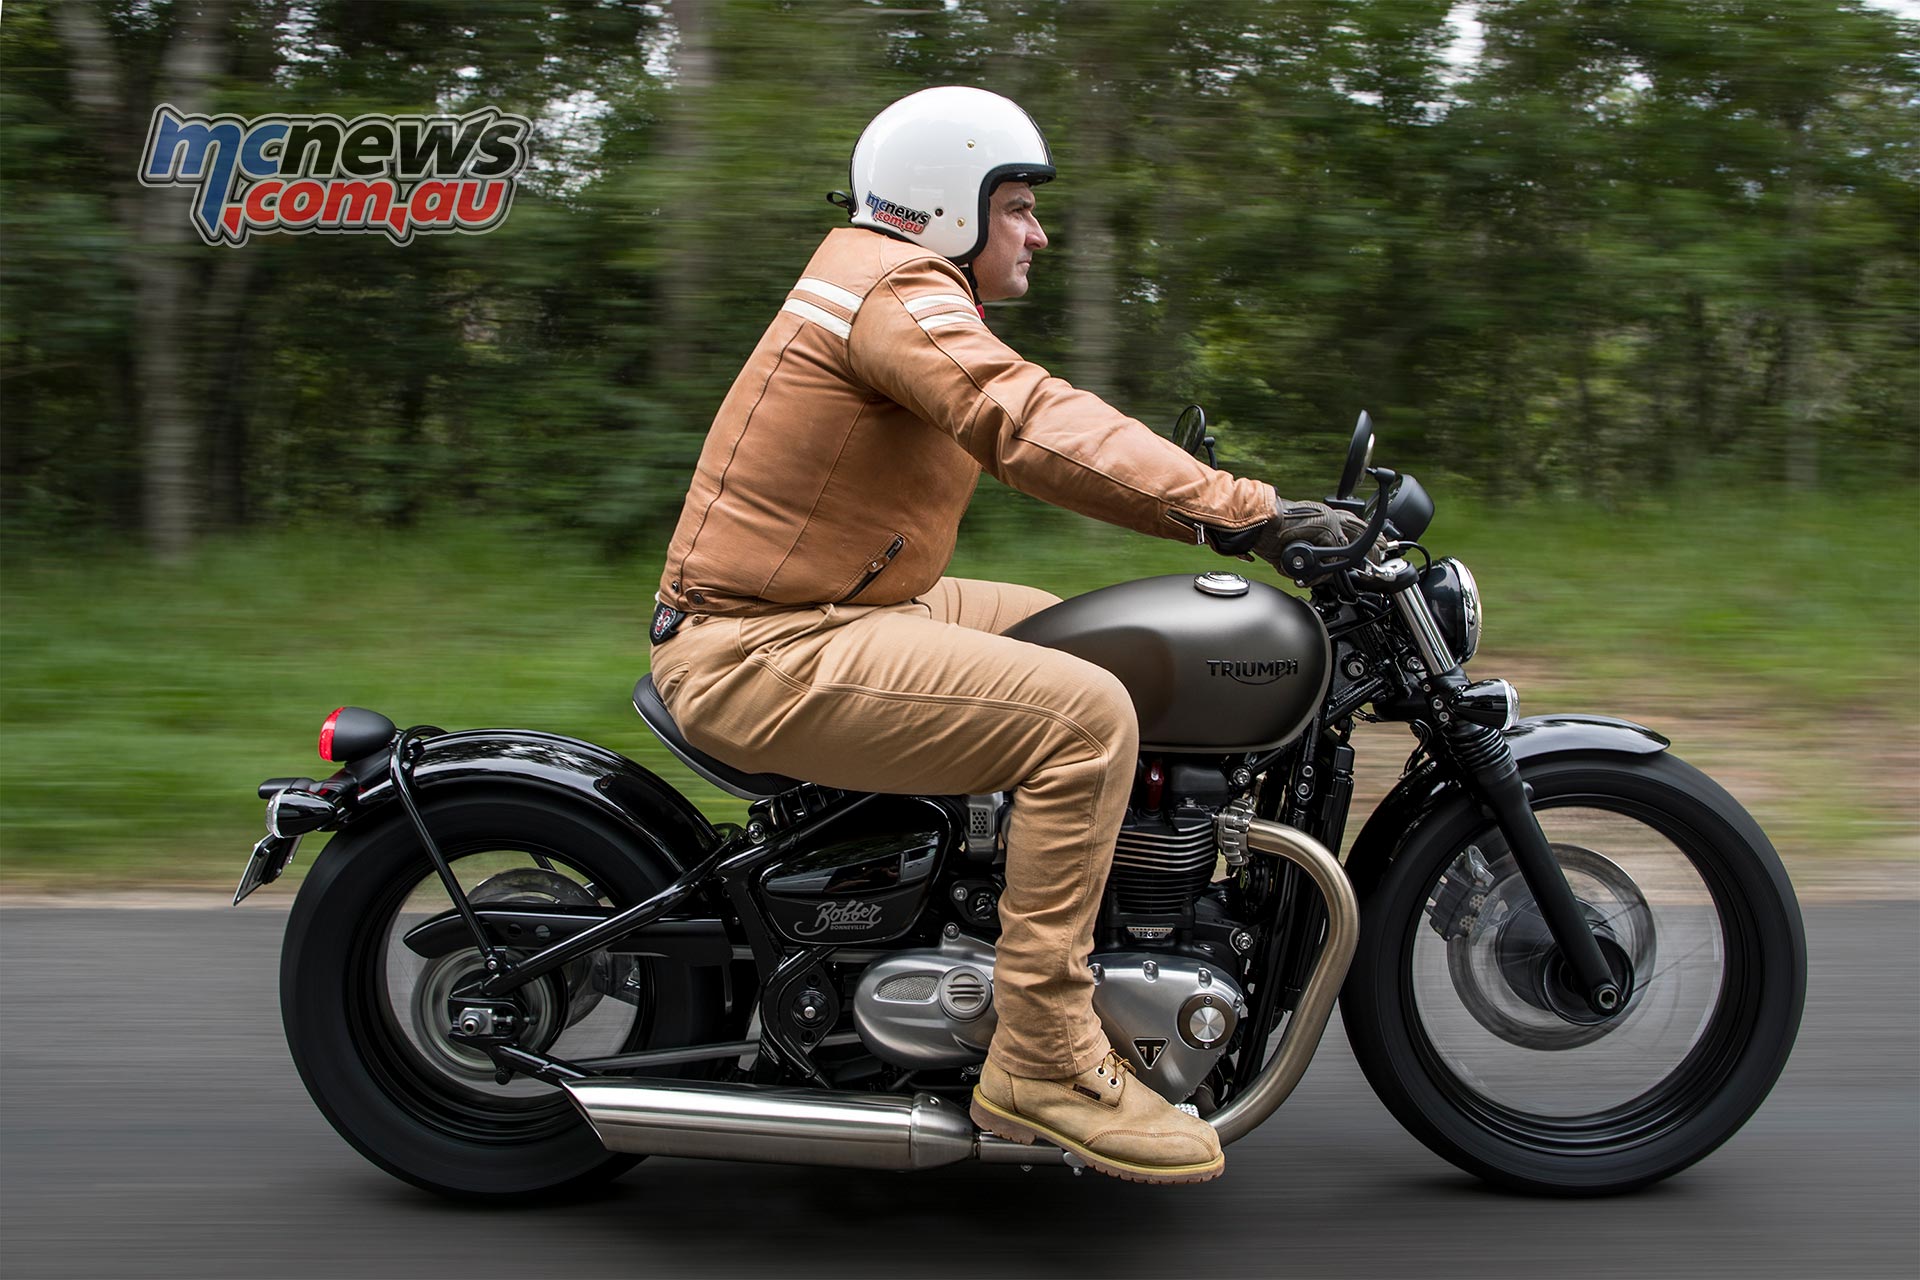 Triumph Bobber Review Does the show have go? MCNews